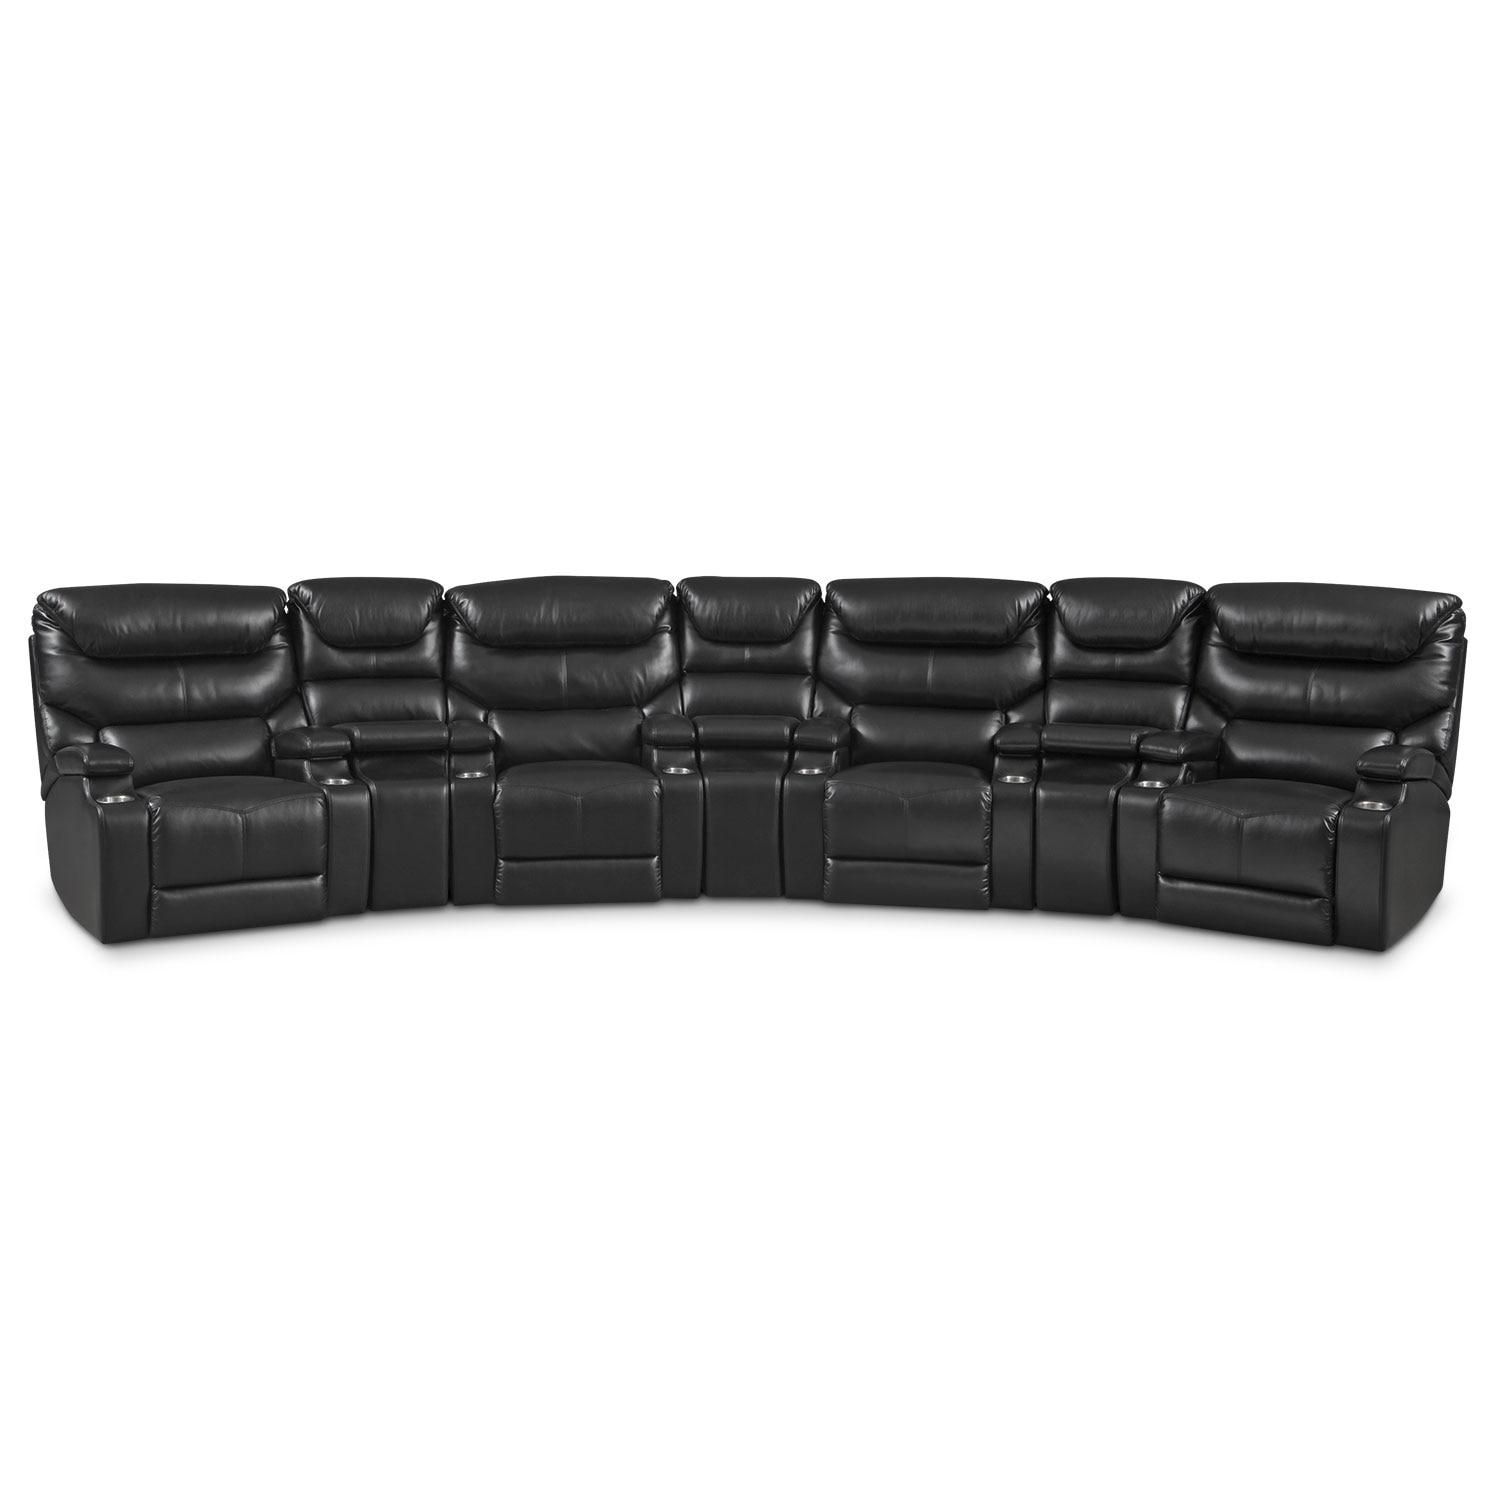 Sectional Sofas | Value City Furniture | Value City Furniture In Sectinal Sofas (View 19 of 20)